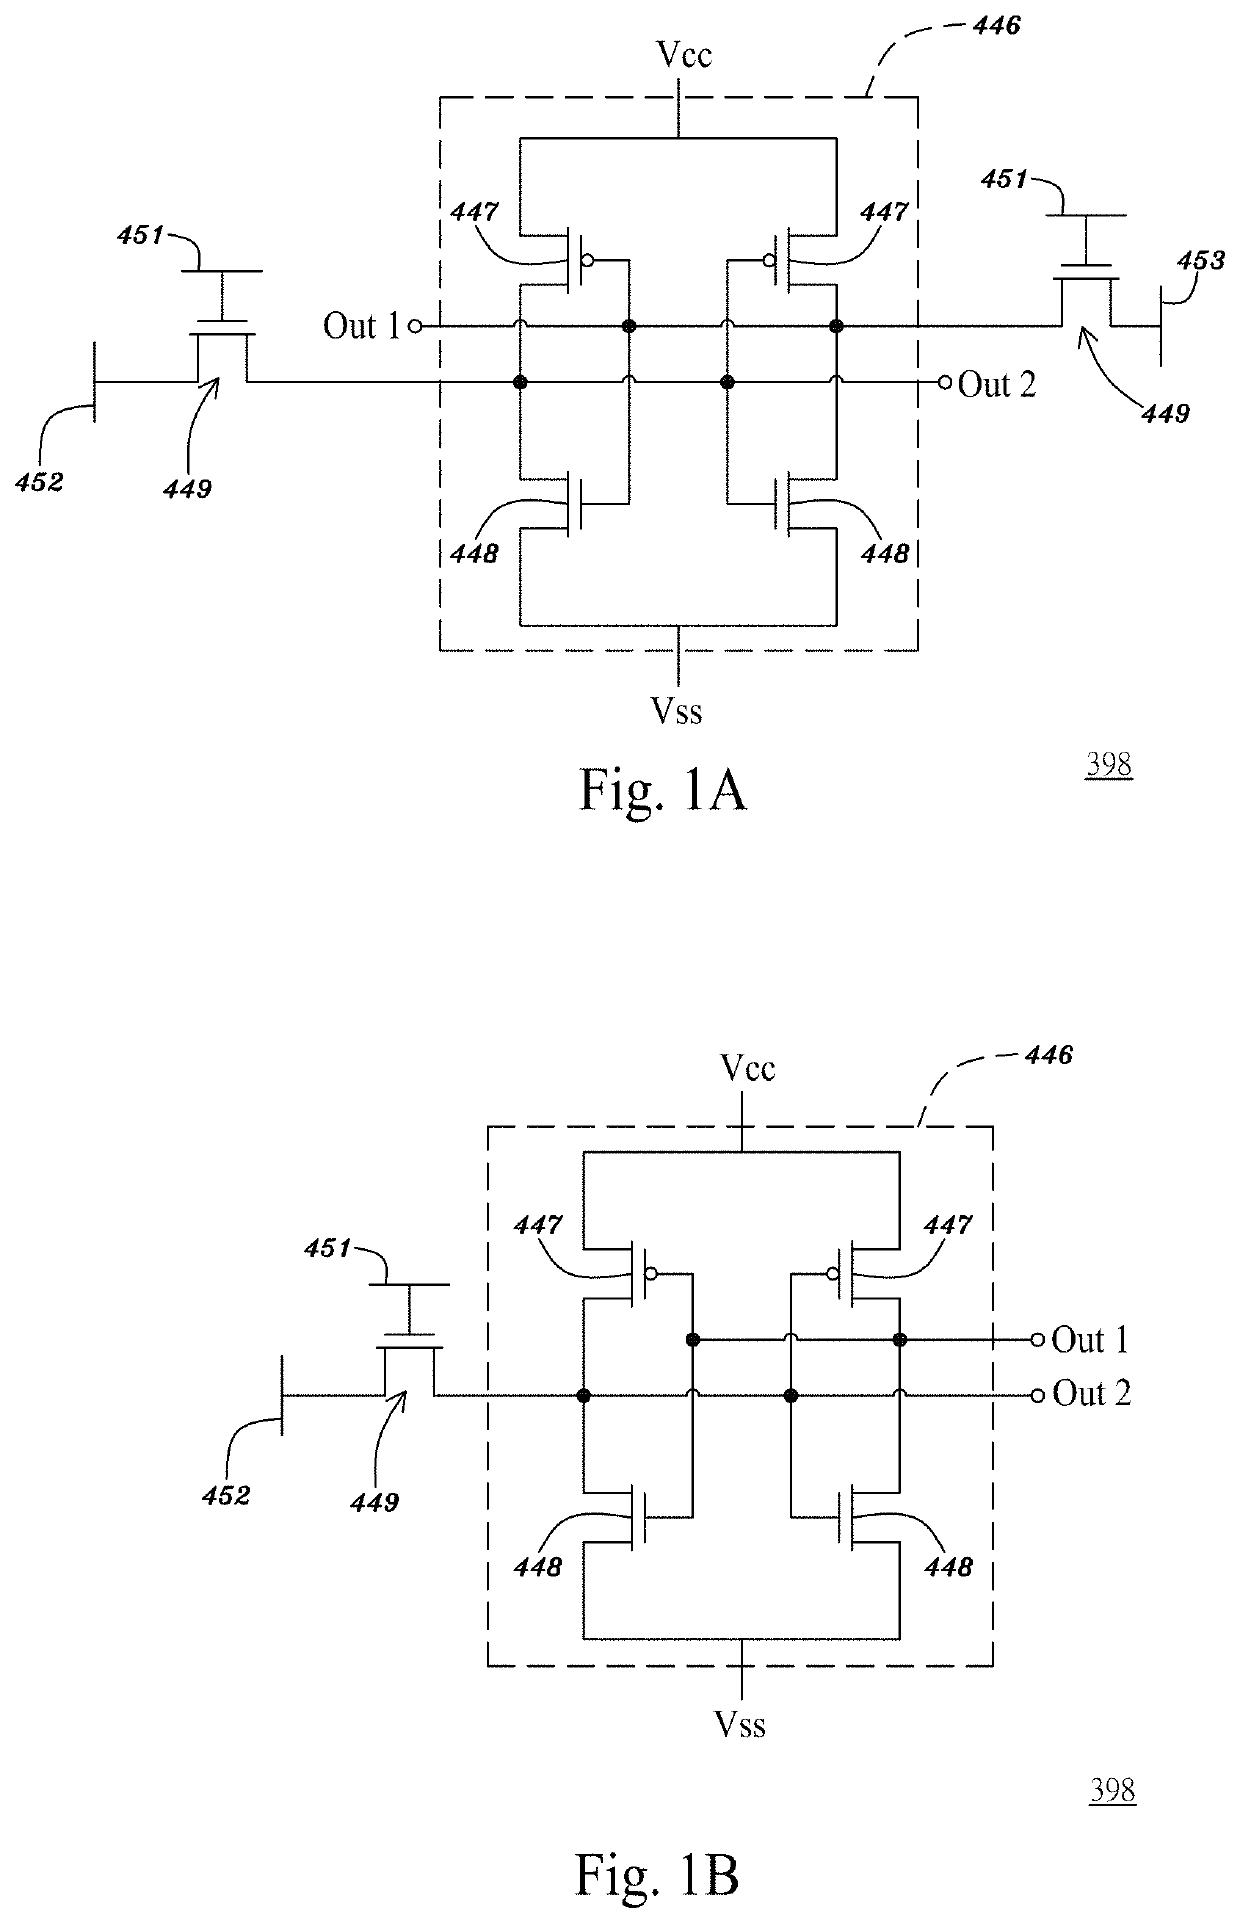 Logic drive based on multichip package comprising standard commodity FPGA IC chip with cryptography circuits